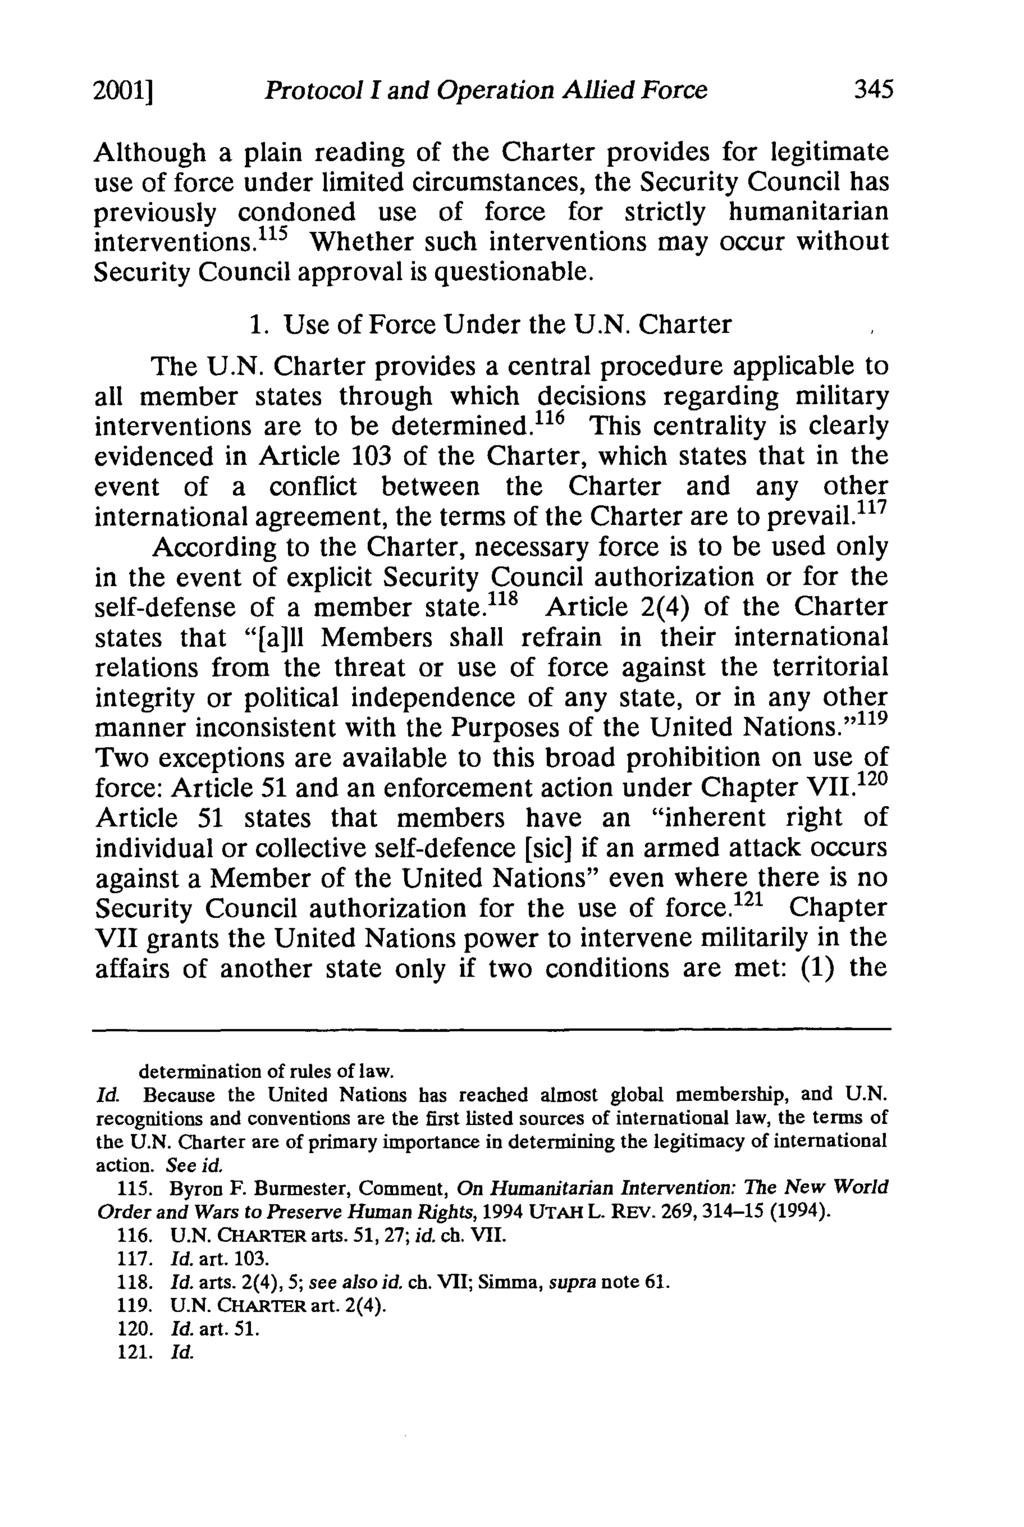 2001] Protocol I and Operation Allied Force Although a plain reading of the Charter provides for legitimate use of force under limited circumstances, the Security Council has previously condoned use